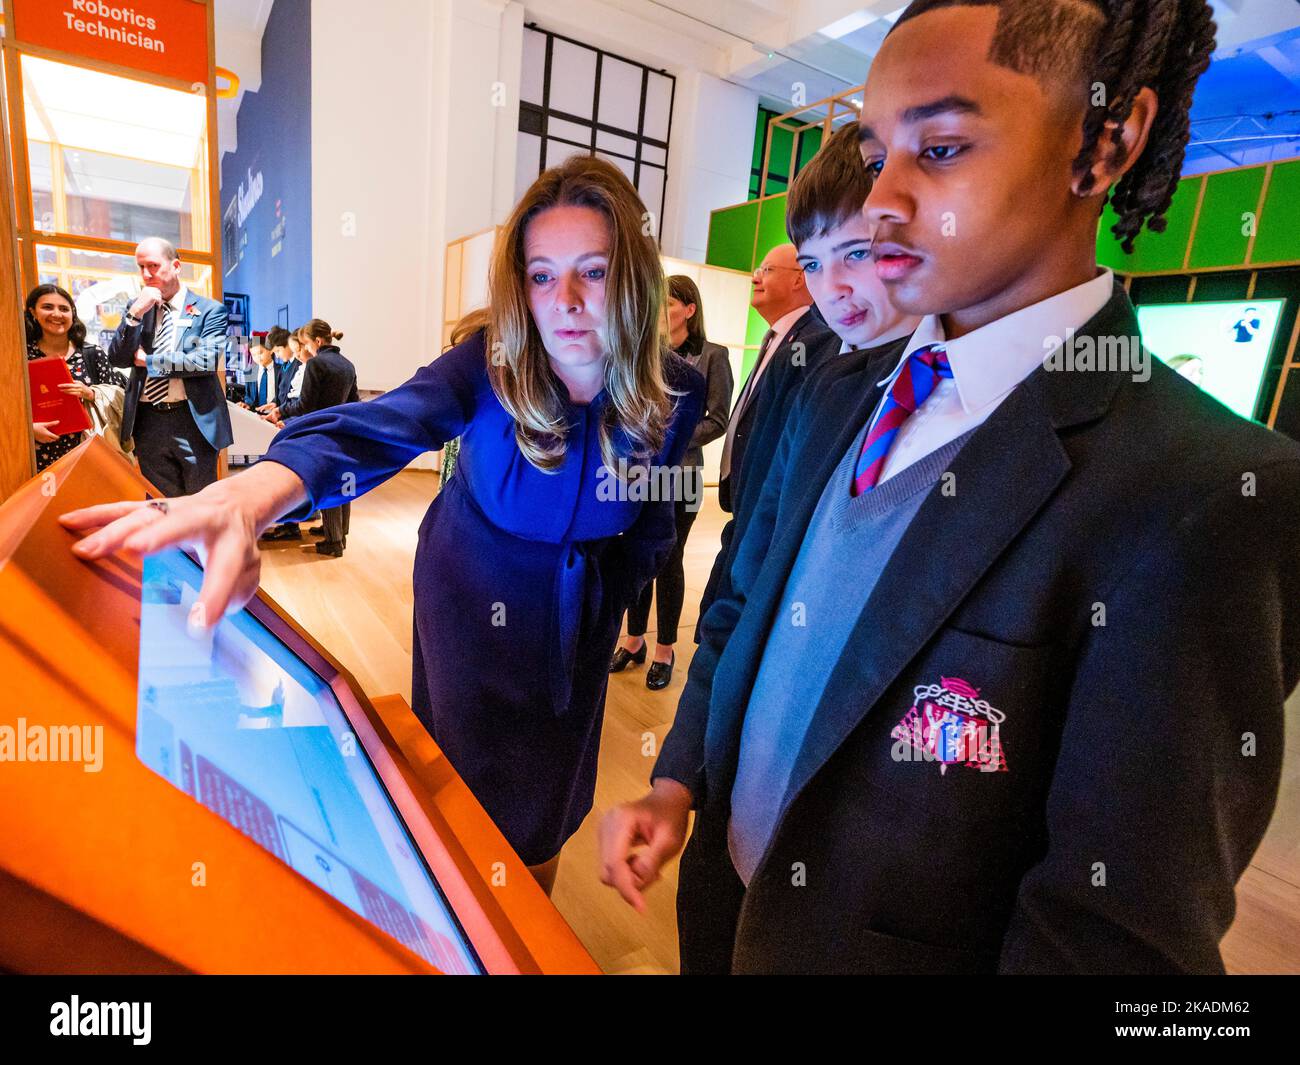 London, UK. 2nd Nov, 2022. Gillian Keegan, Conservative MP for Chichester, Secretary of State for Education helps some school children with one of the consoles - Technicians: The David Sainsbury Gallery at the Science Museum, ahead of the public opening on Thursday 3 November. Credit: Guy Bell/Alamy Live News Stock Photo